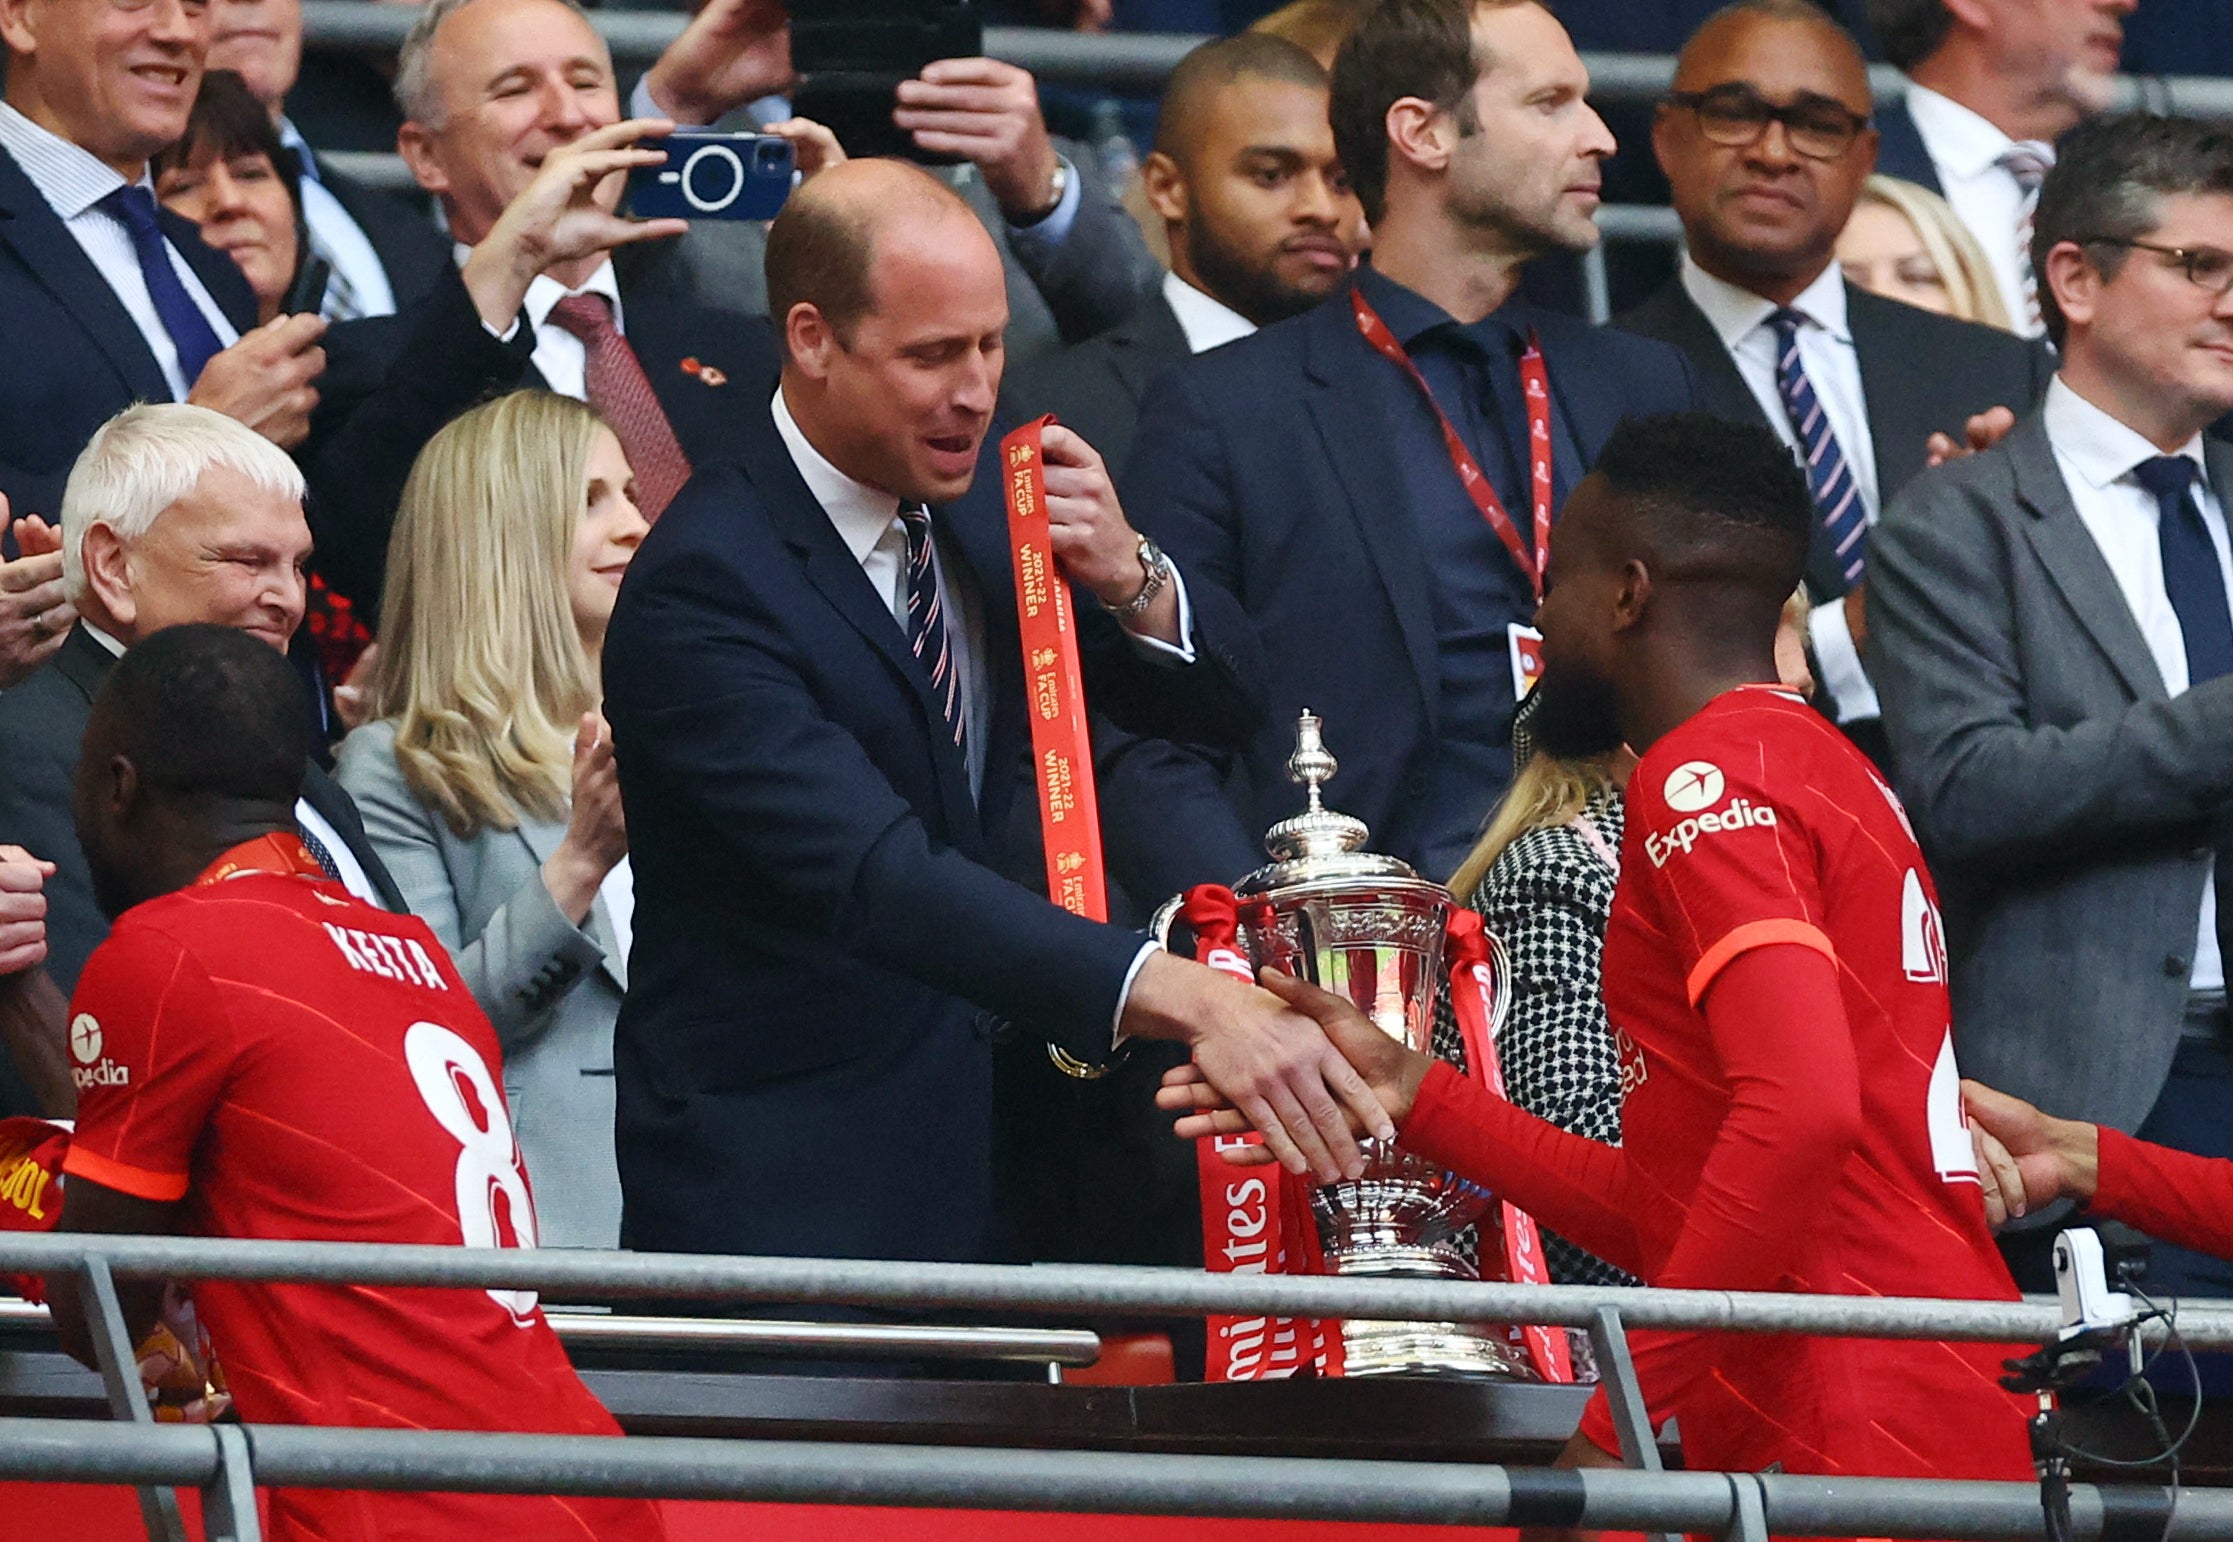 Prince William will attend the FA Cup final tomorrow